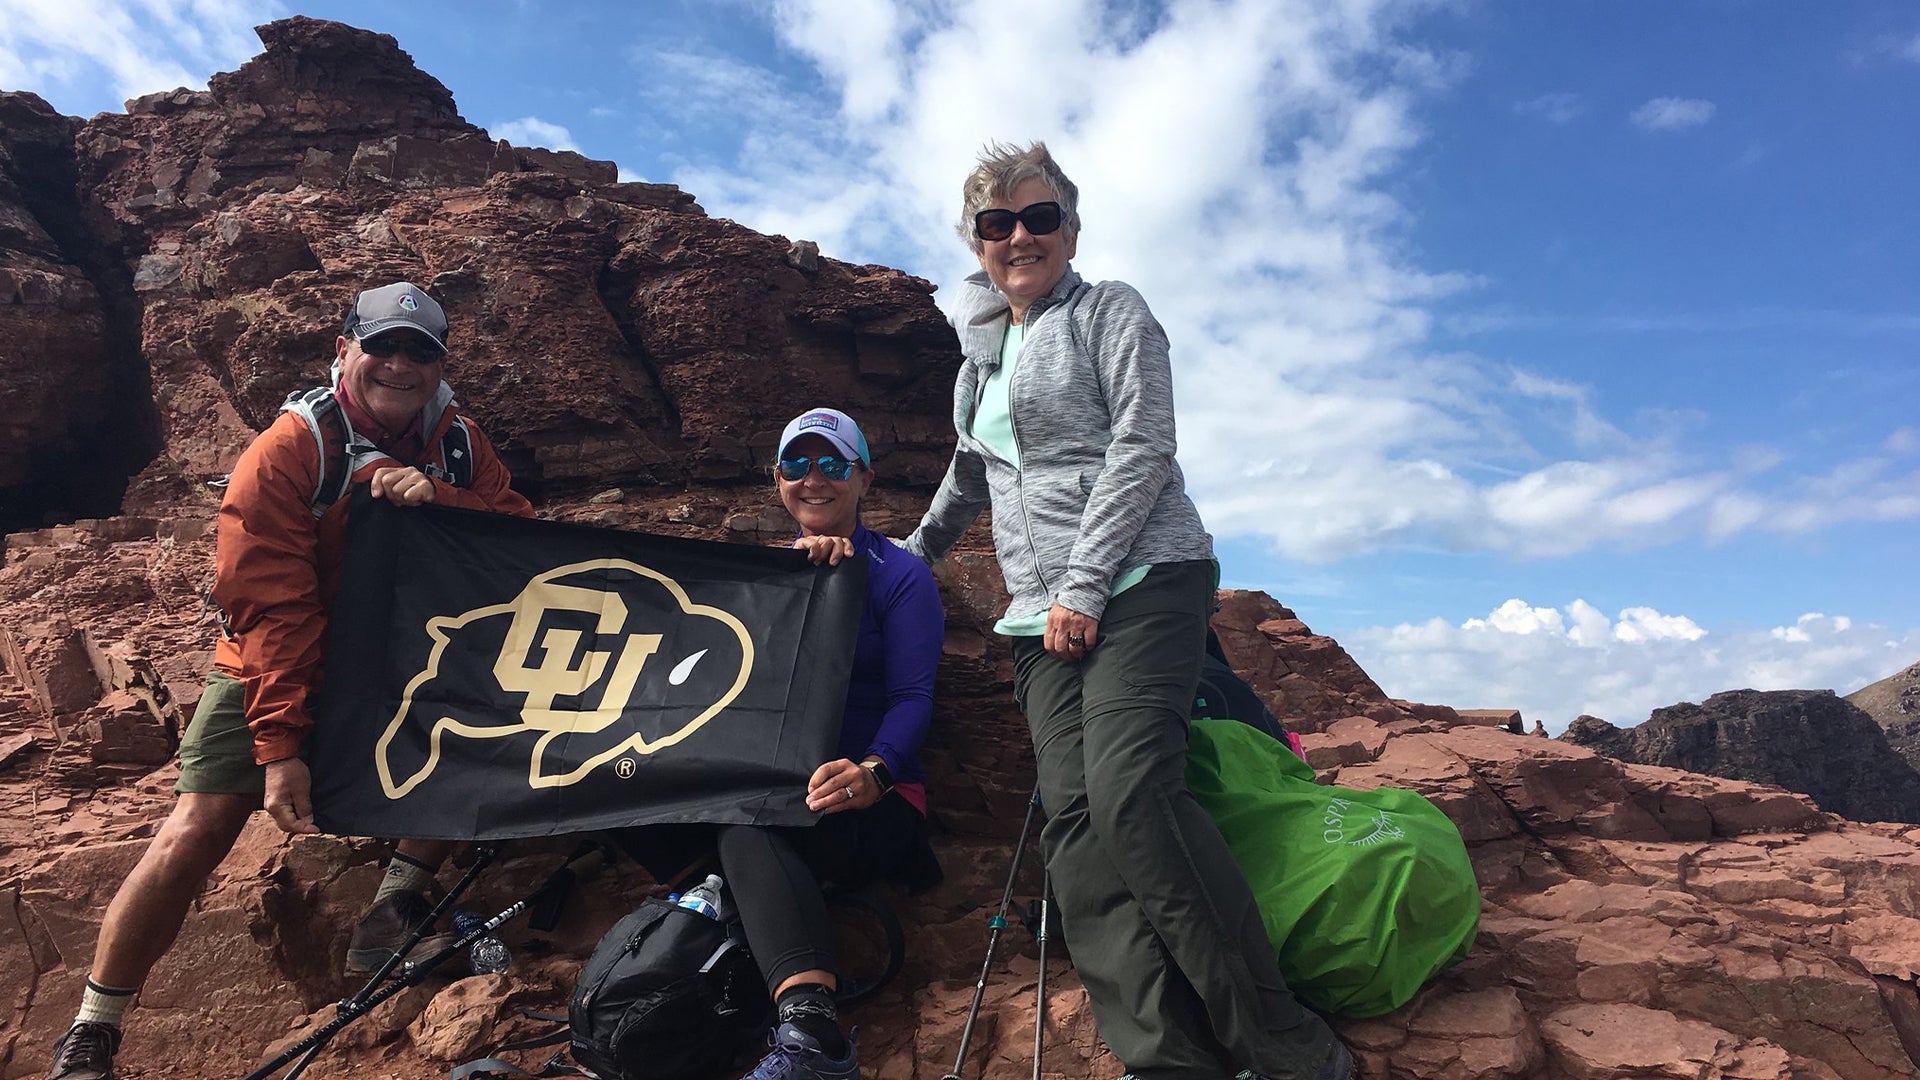 A group of alumni with a CU Bouder flag on a mountaintop